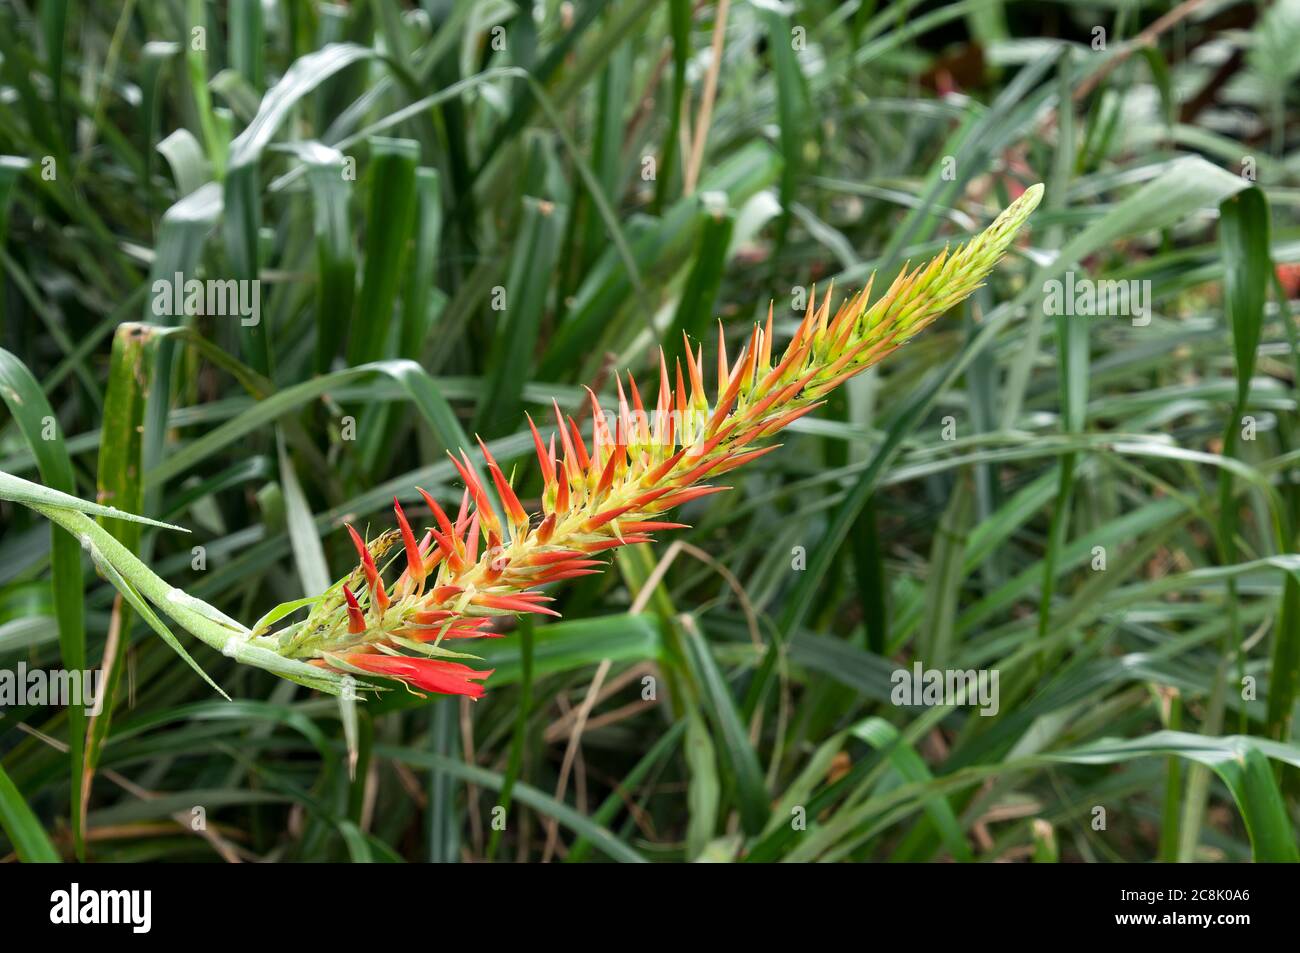 Sydney Australia, flower spike of a Pitcairnia flammea in garden with blurred background Stock Photo